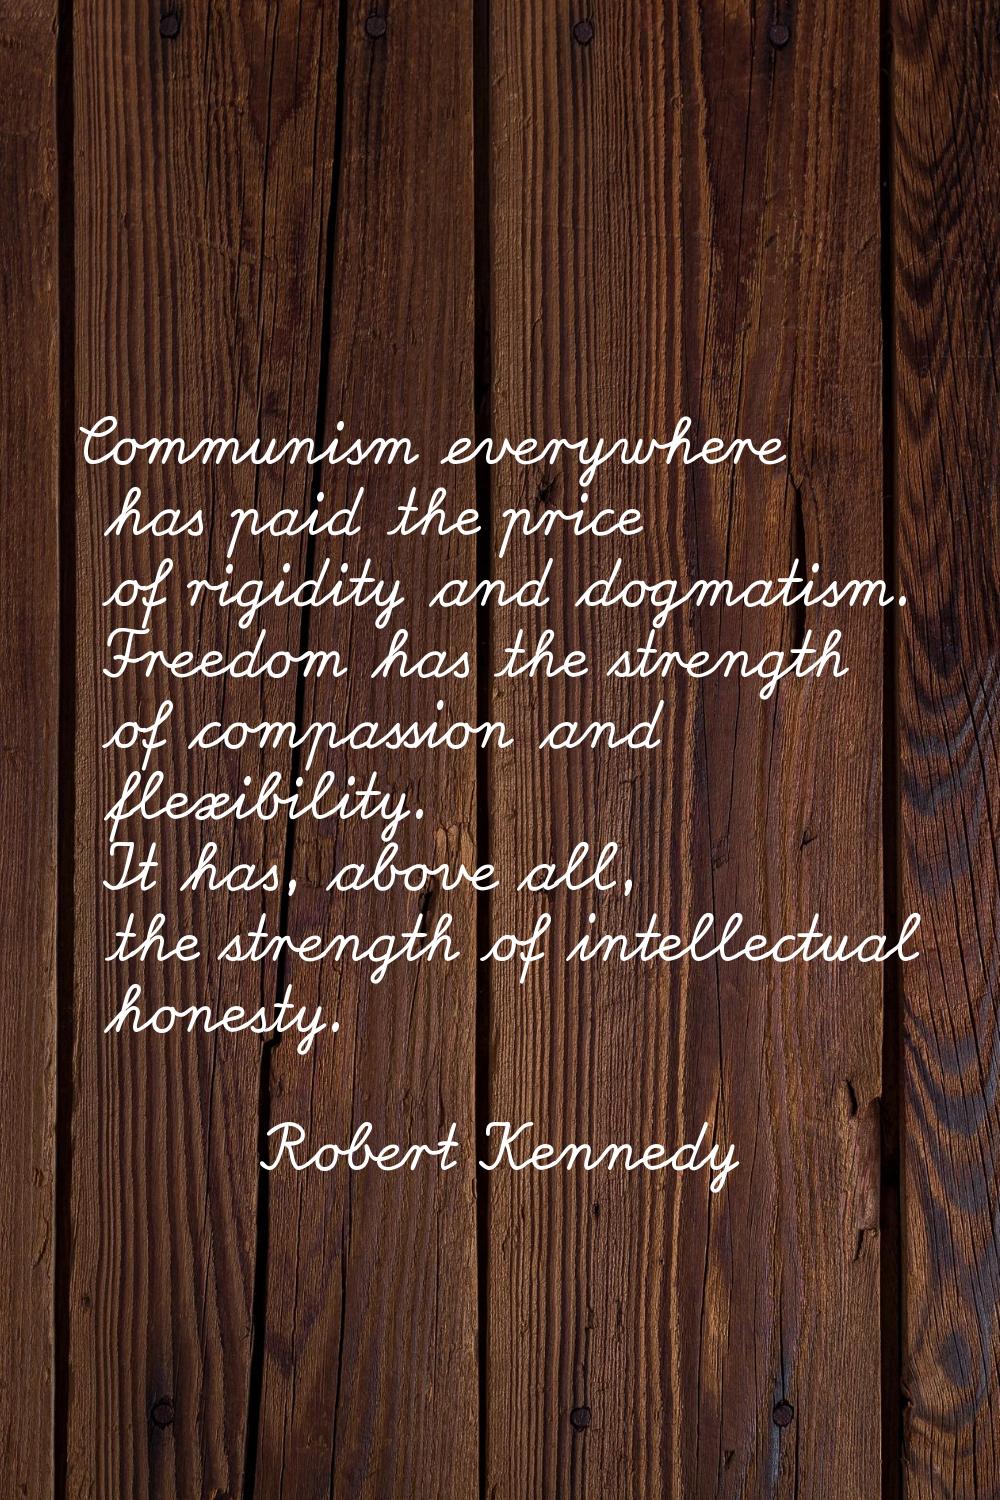 Communism everywhere has paid the price of rigidity and dogmatism. Freedom has the strength of comp